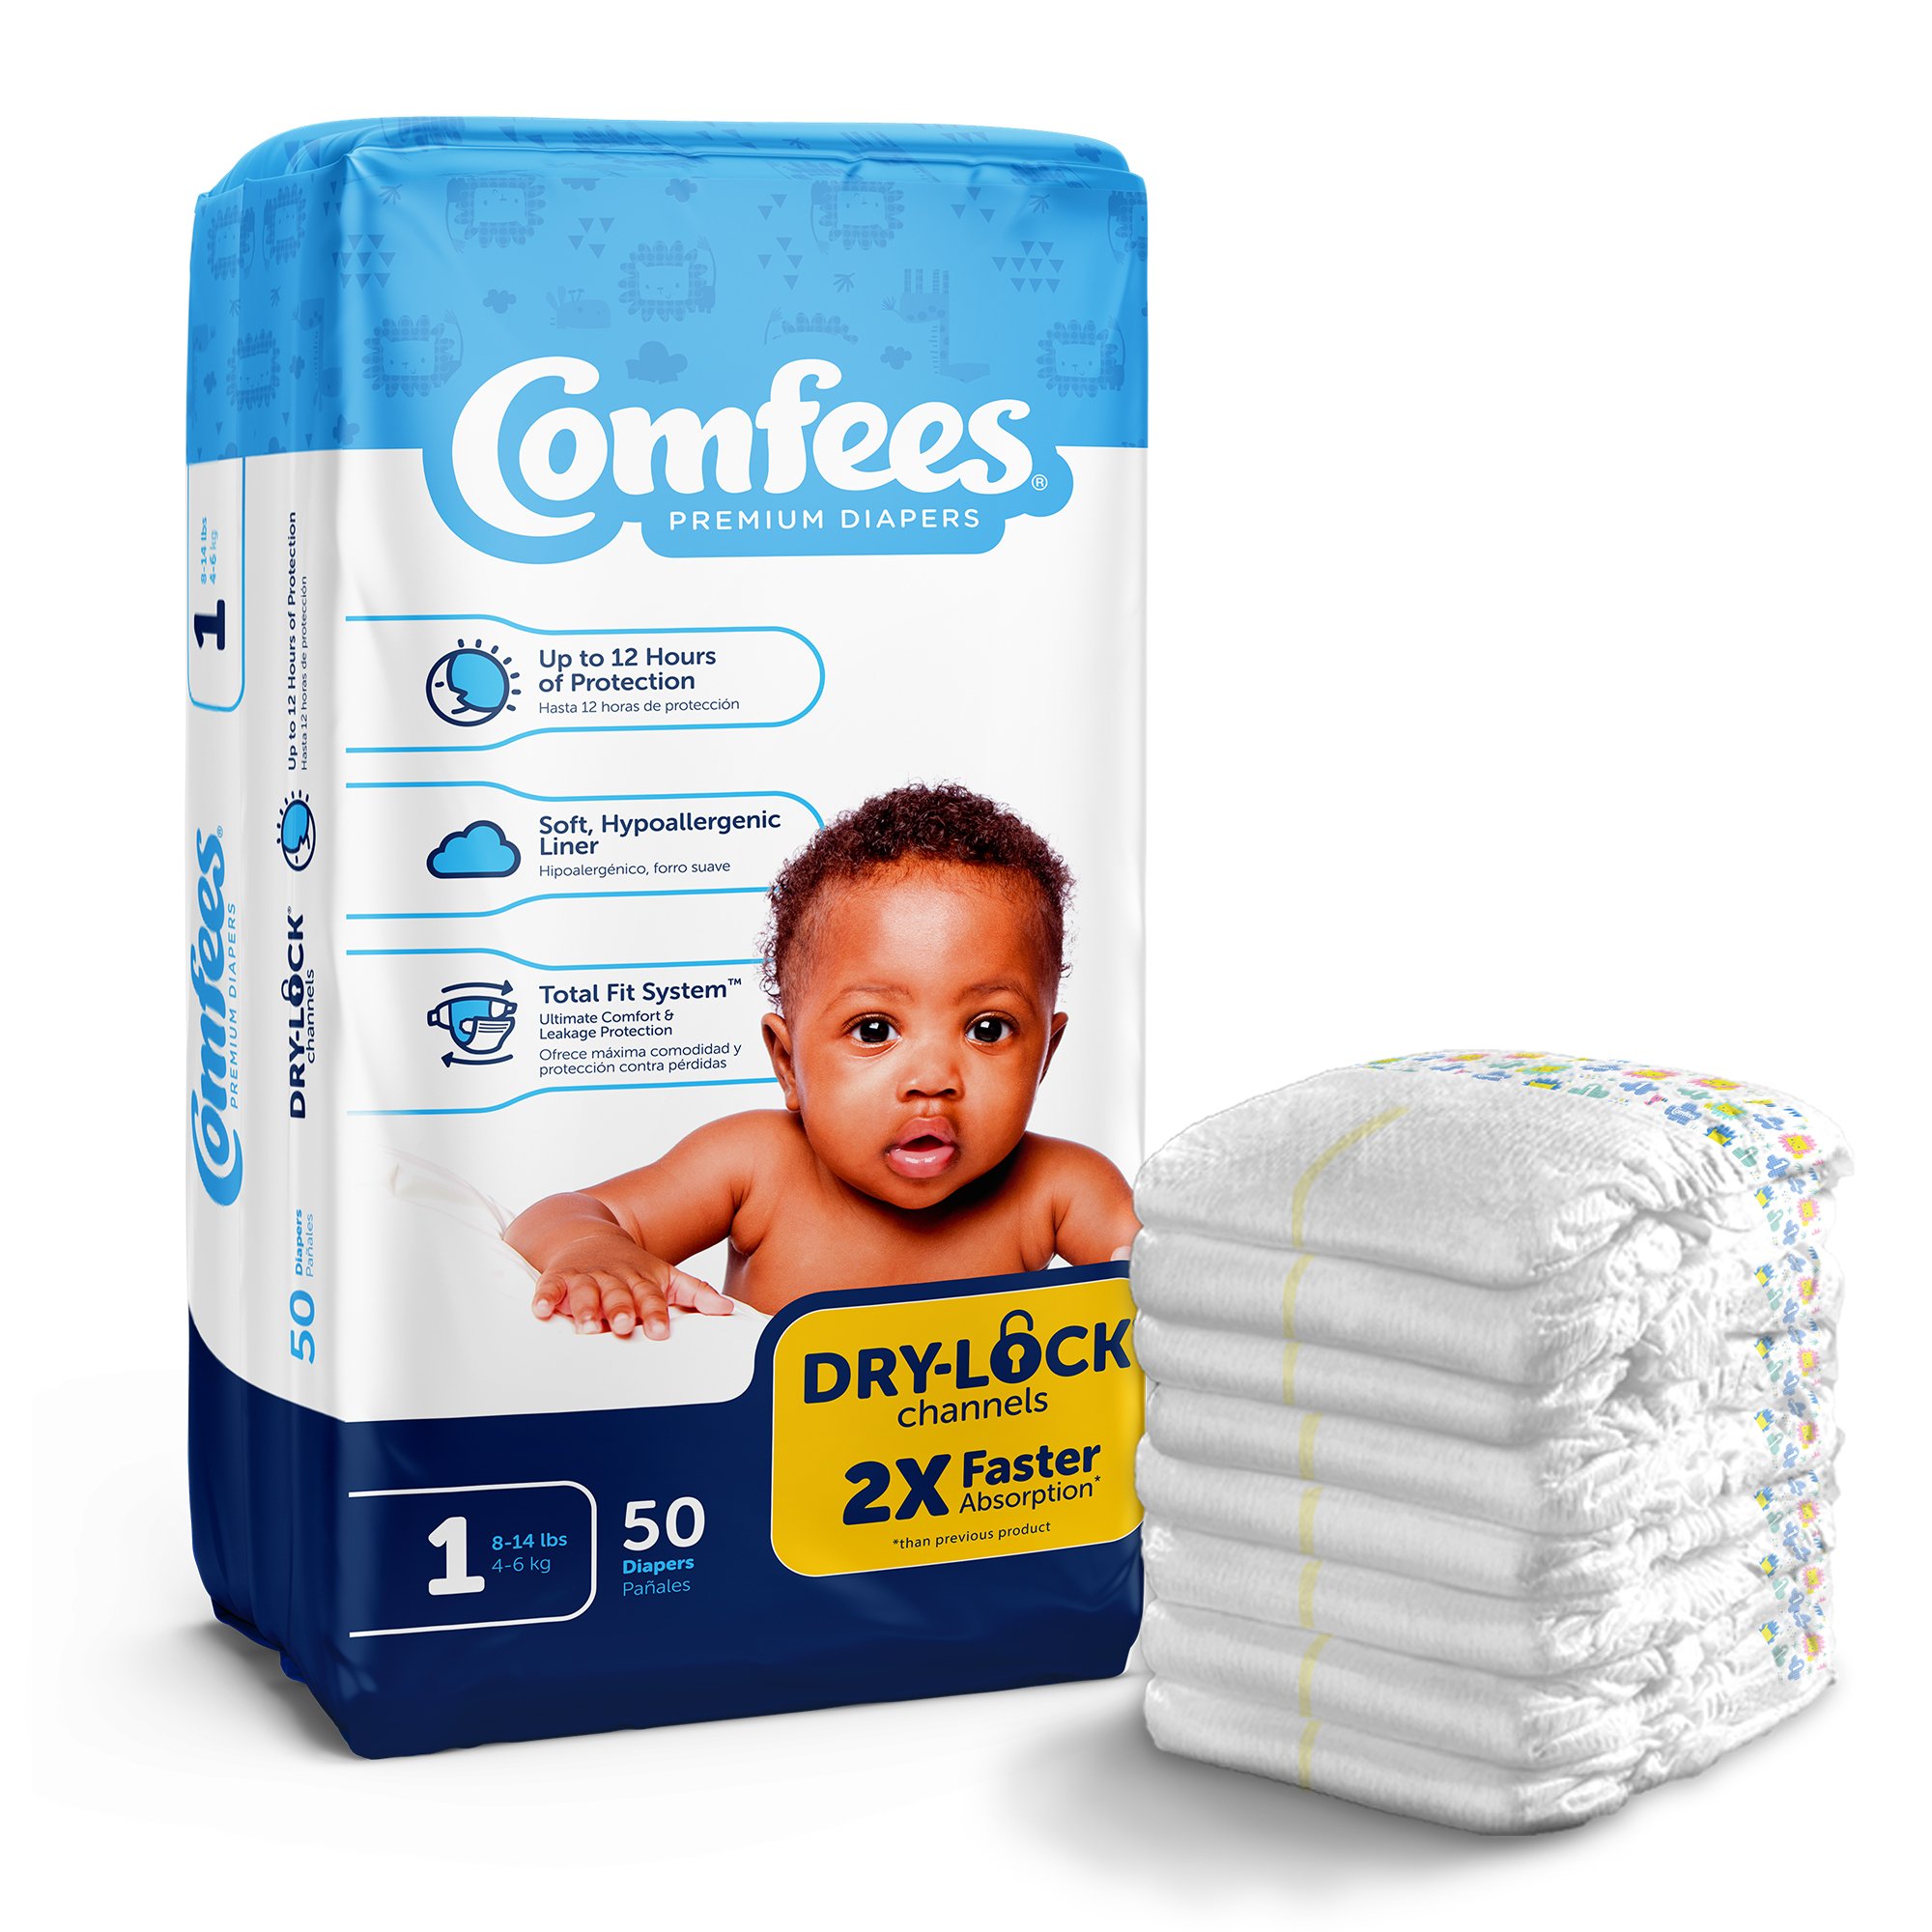 Comfees Baby Baby Diaper Size 1, 12 hour protection 8 to 14 lbs., 50 Count, 1 Pack - image 1 of 4